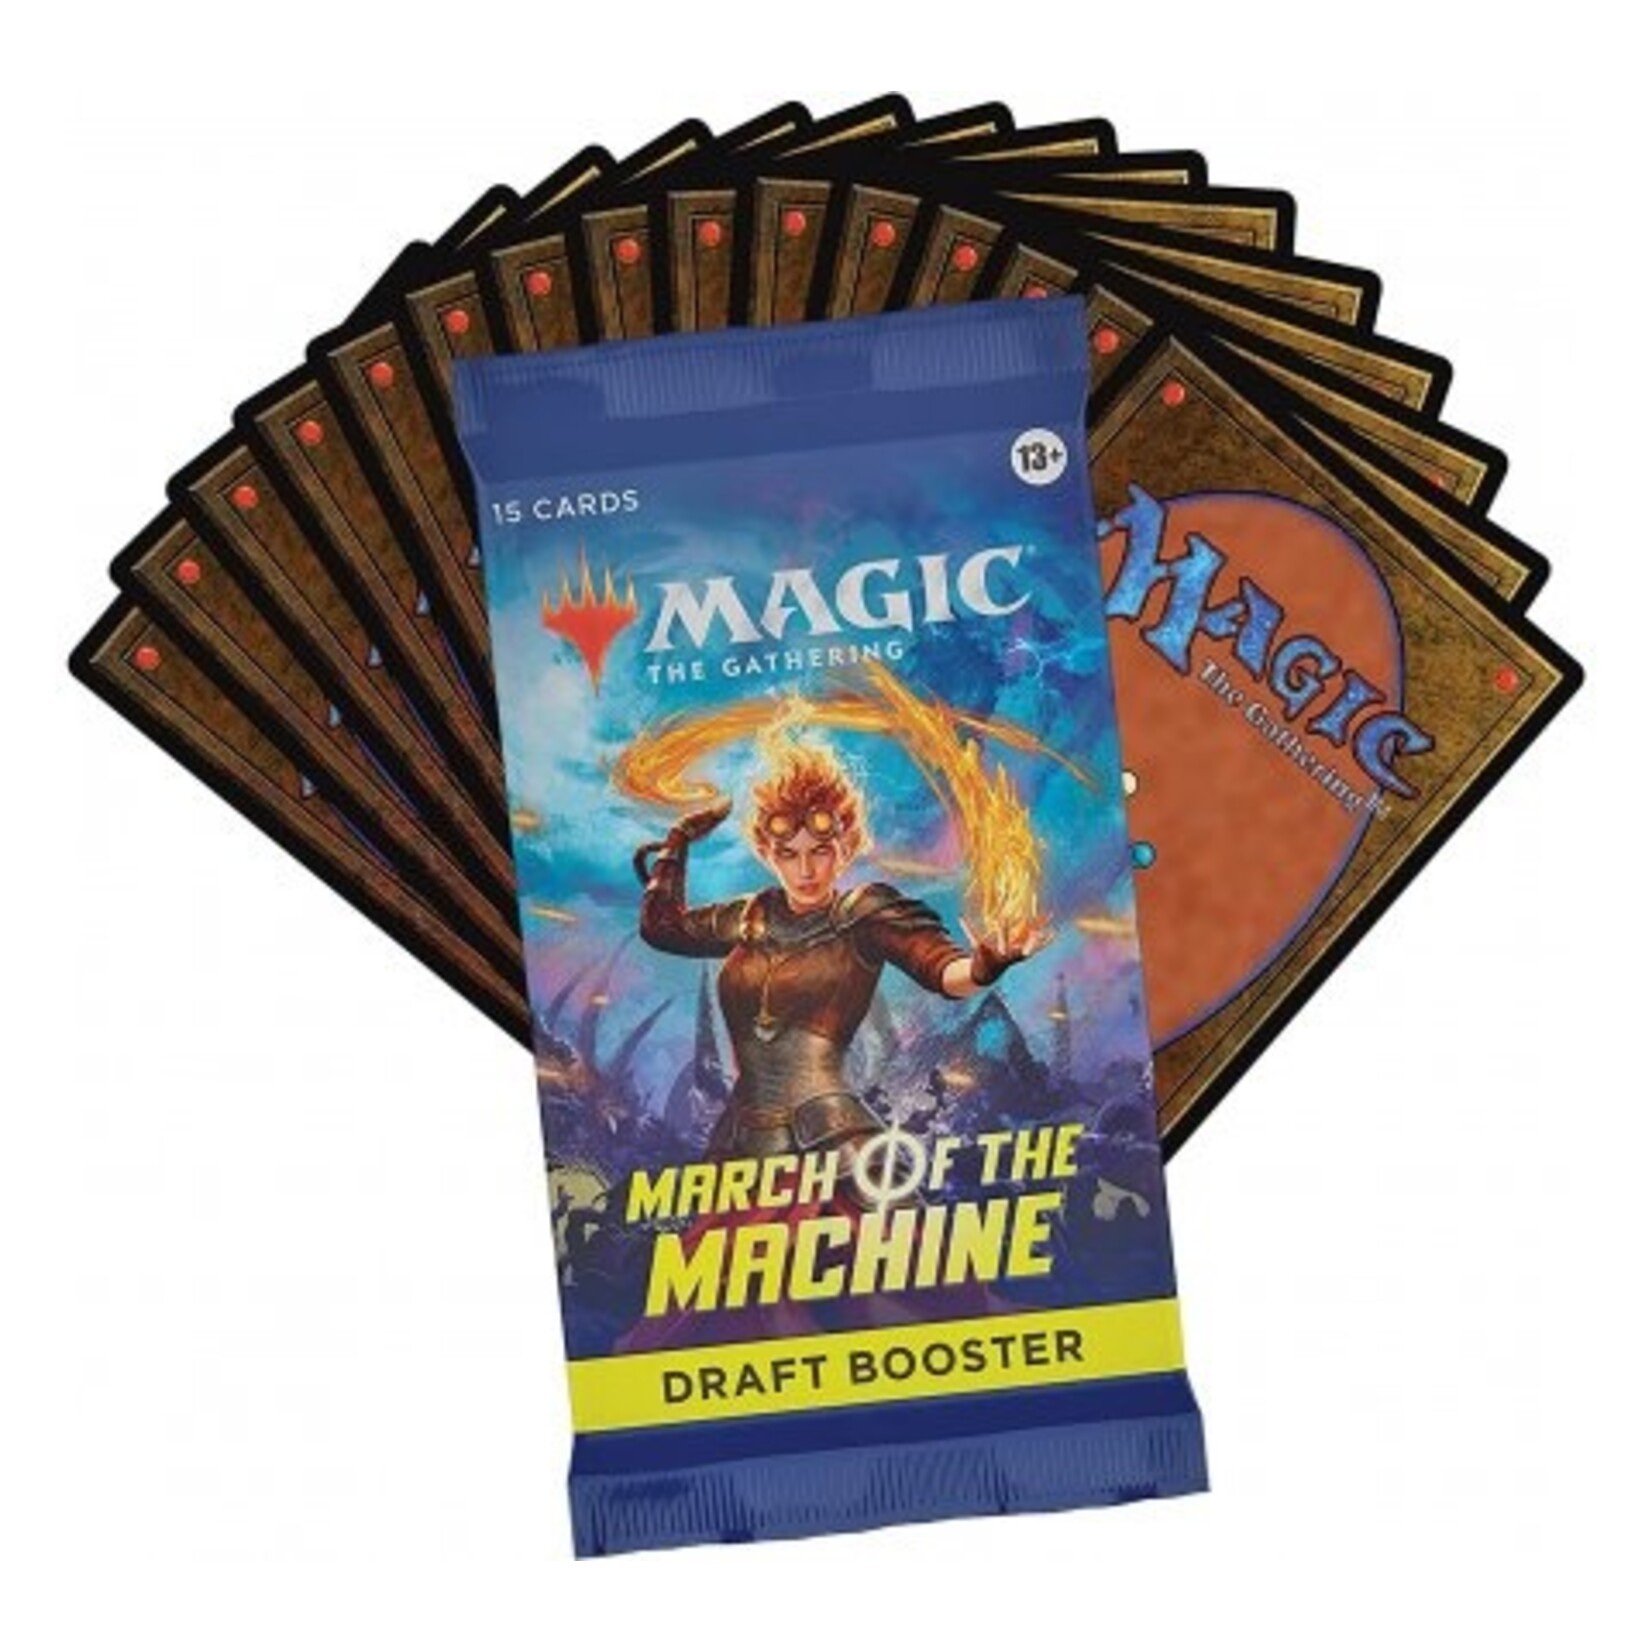 Magic the gathering March of the machine: Draft box